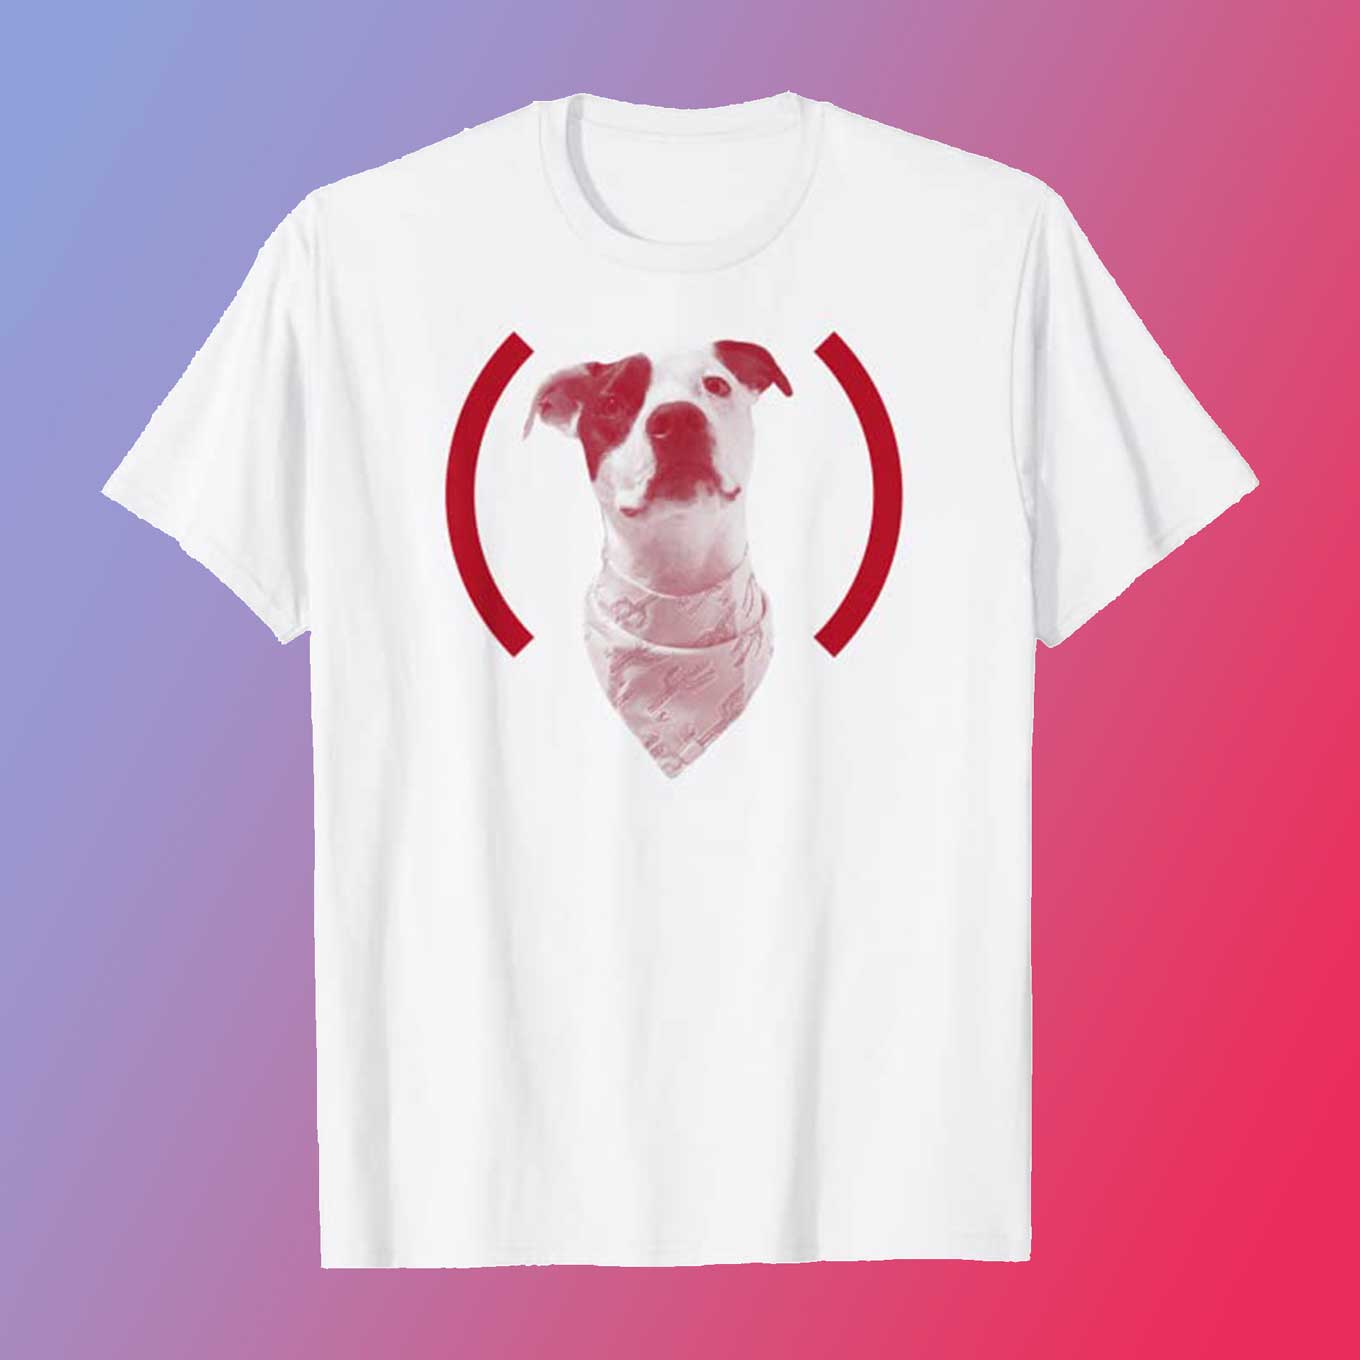 Shirt with dog on it